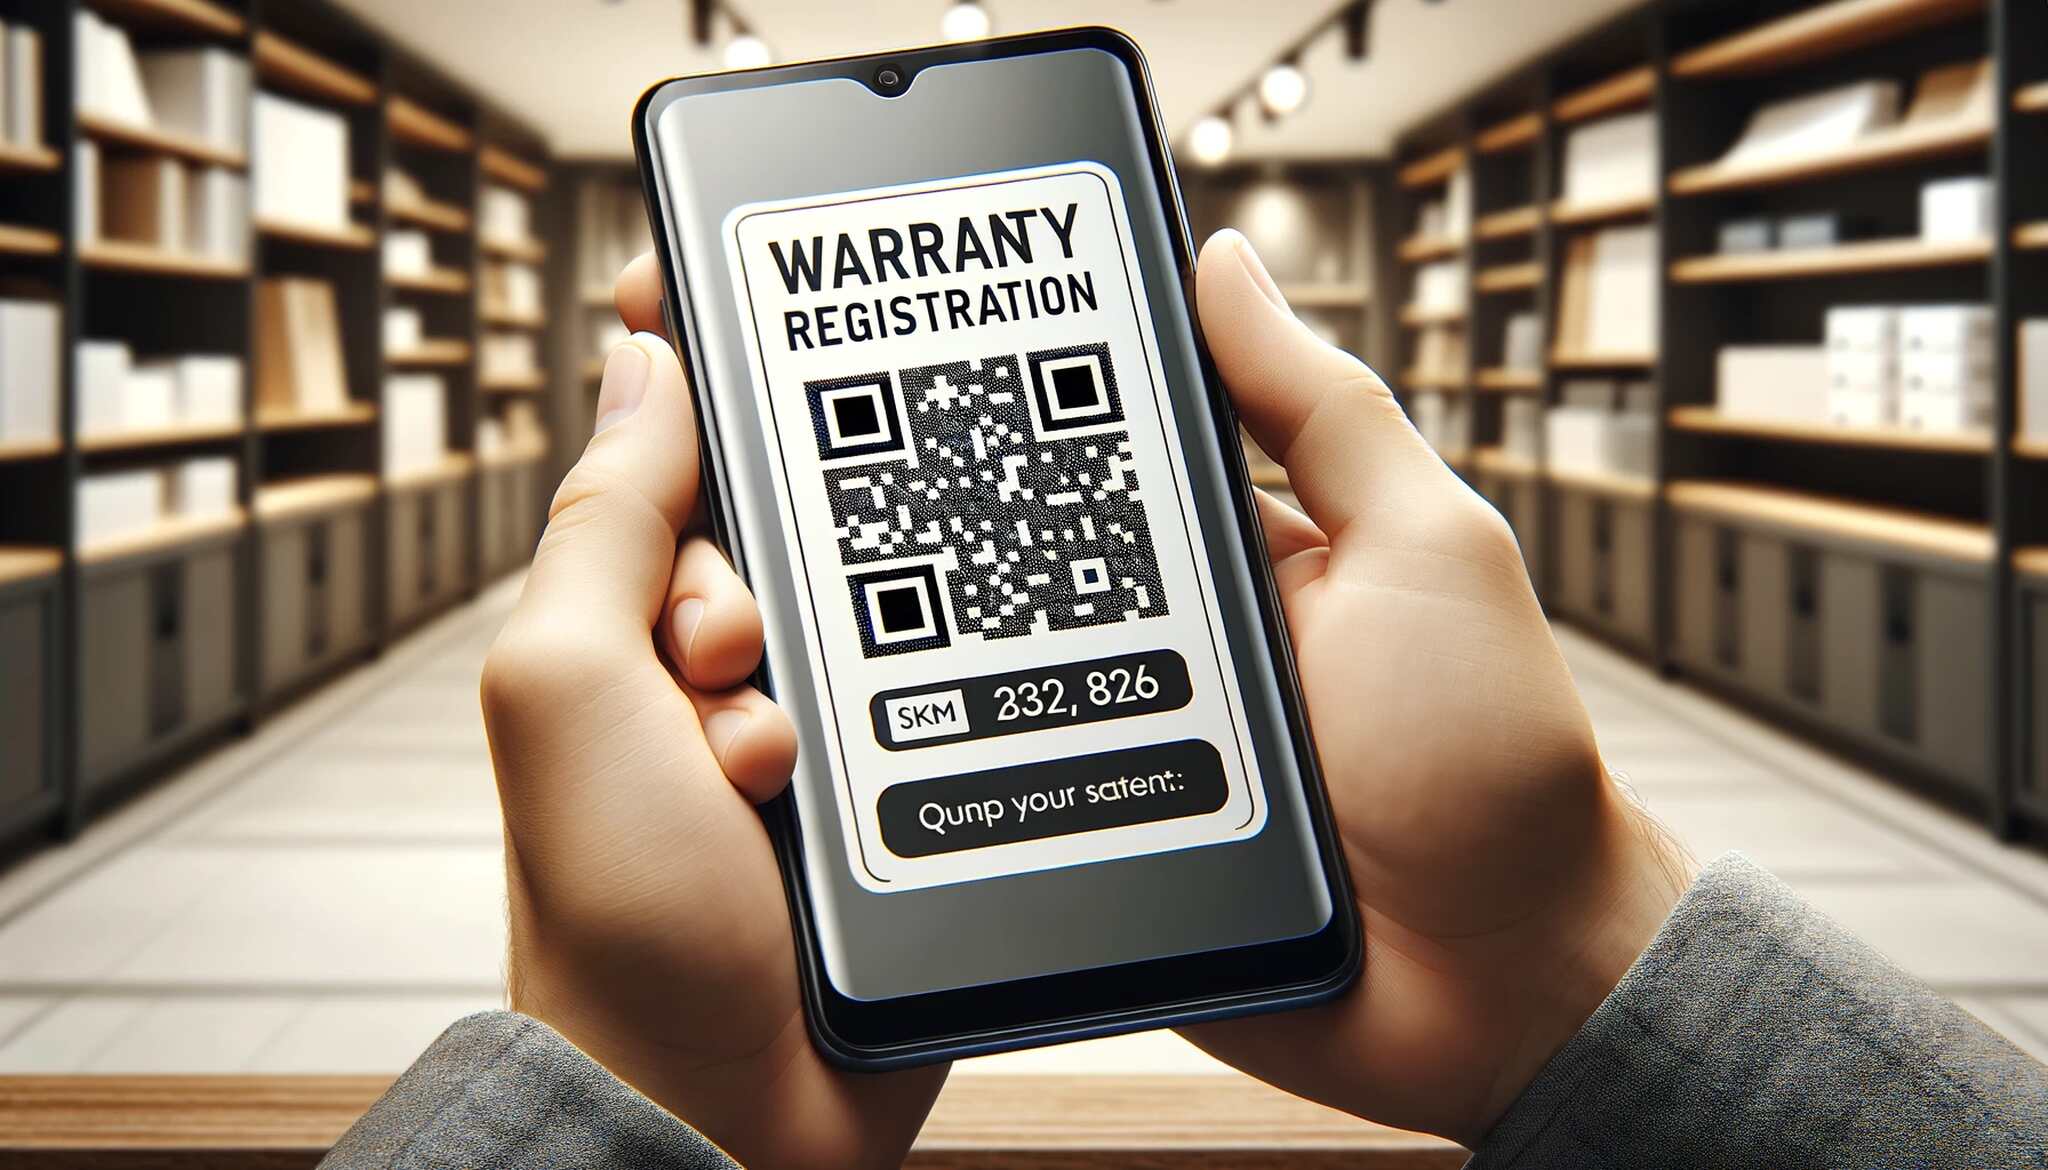 s smartphone, held in a person's hands and the screen displays a QR code for warranty